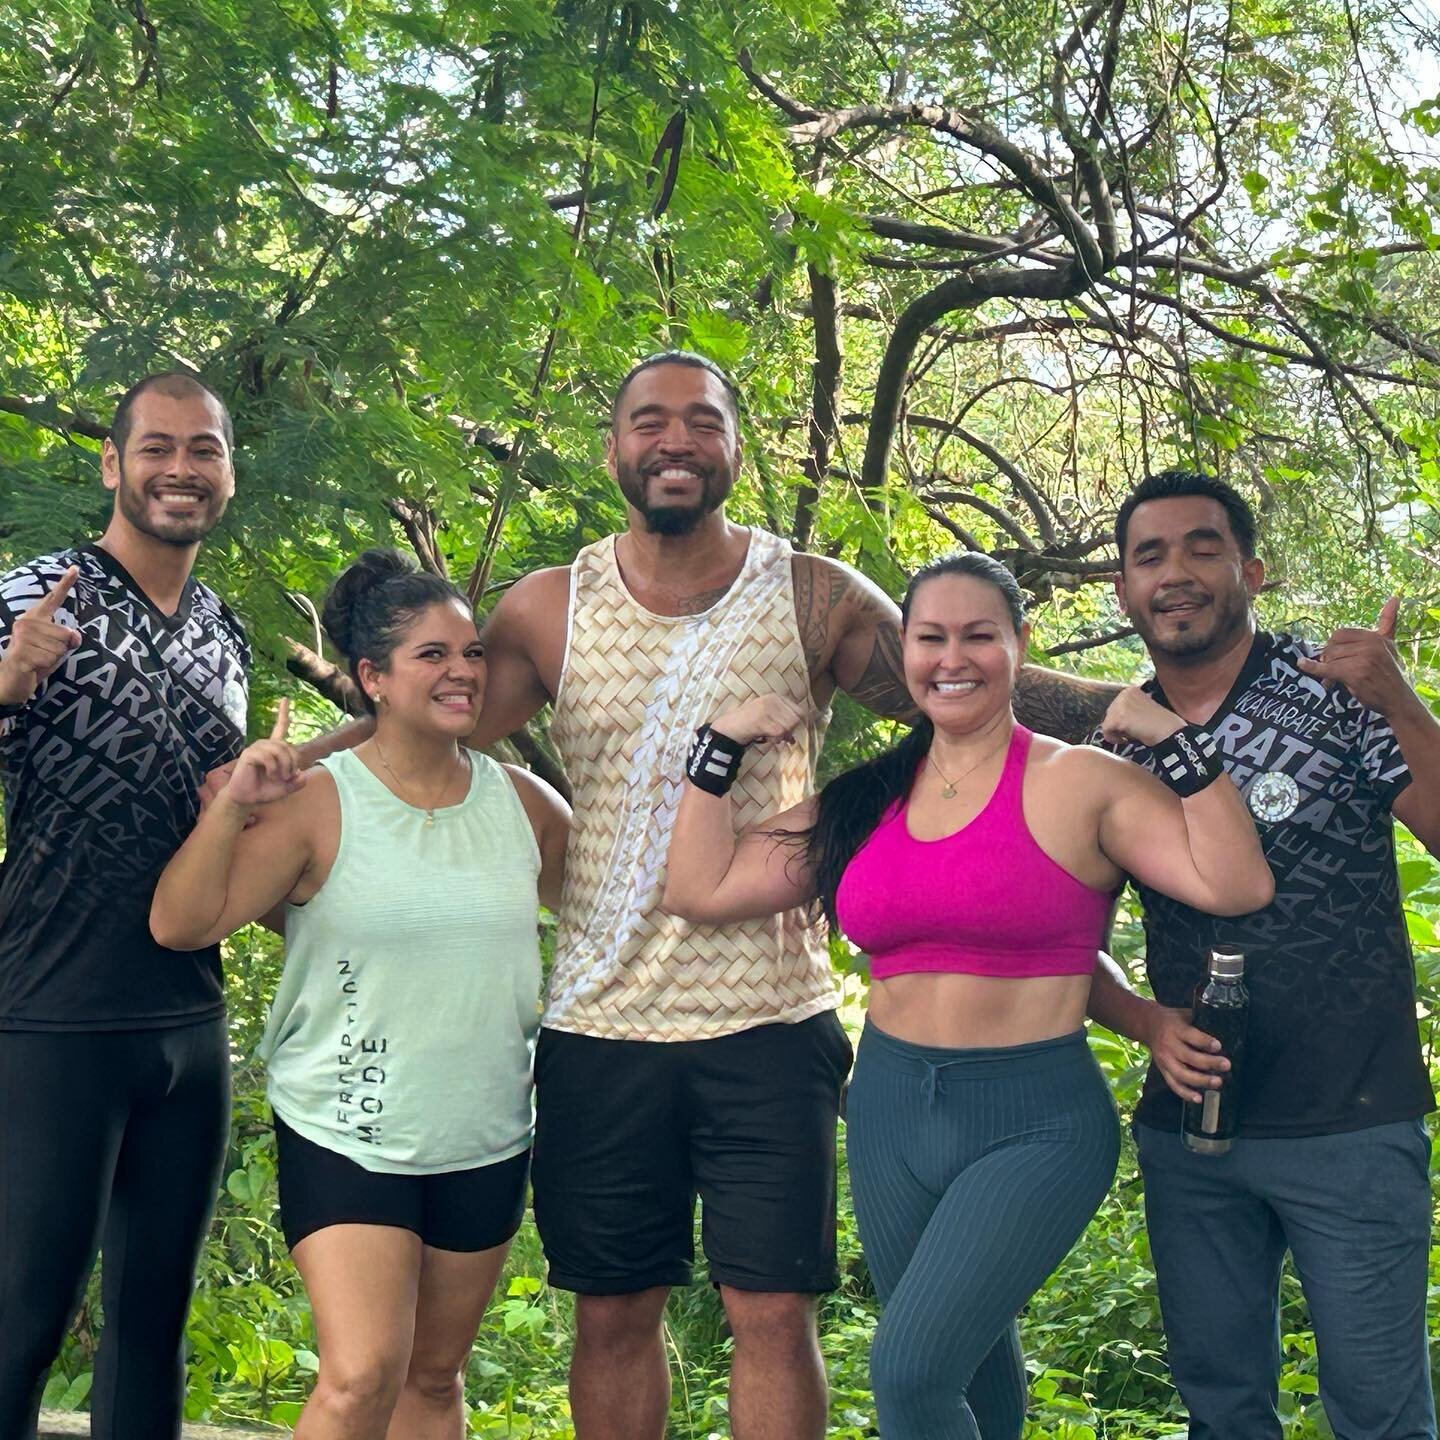 On our last visit to Puerto Vallarta we had the pleasure of working with @romano.pv and his students for a great outdoor session! Training is not limited to the way you like to exercise or where you&rsquo;d like to train. Always look to learn new thi